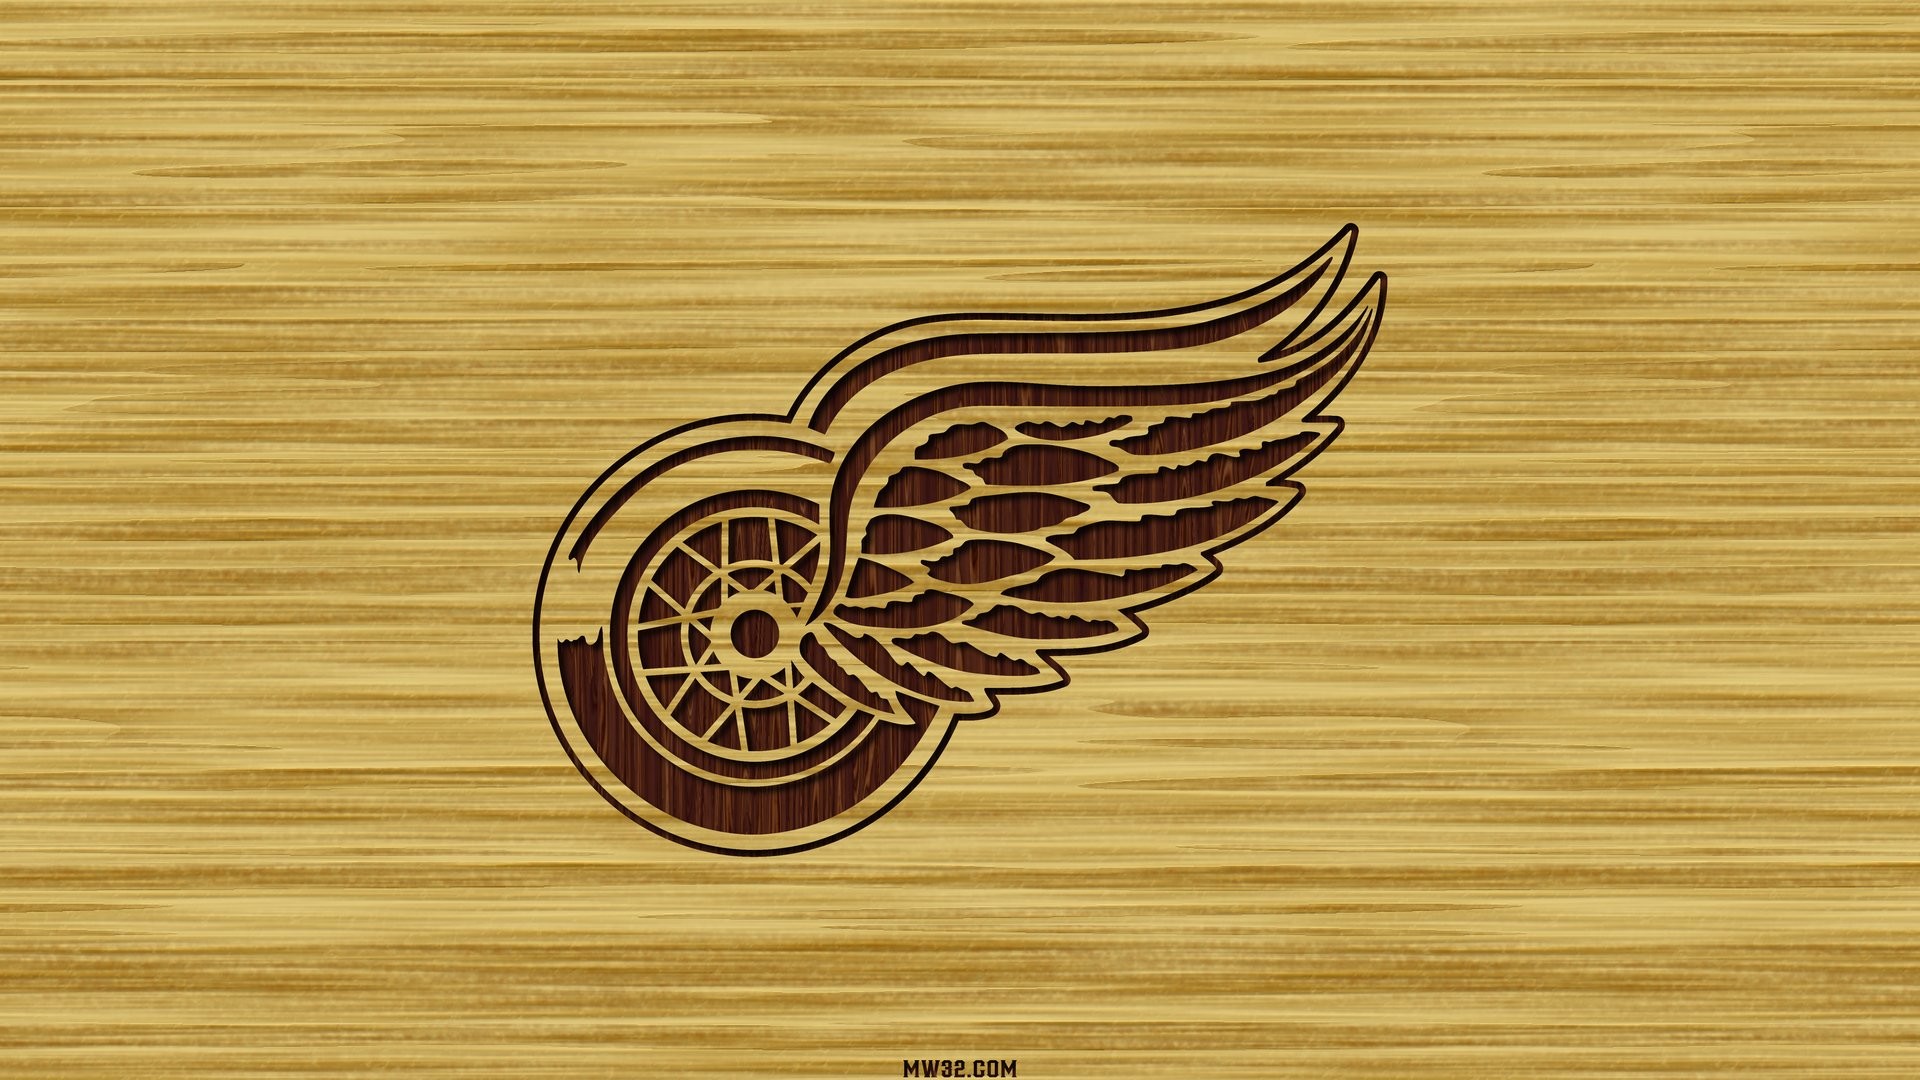 Detroit Red Wings Wallpapers  Detroit Red Wings